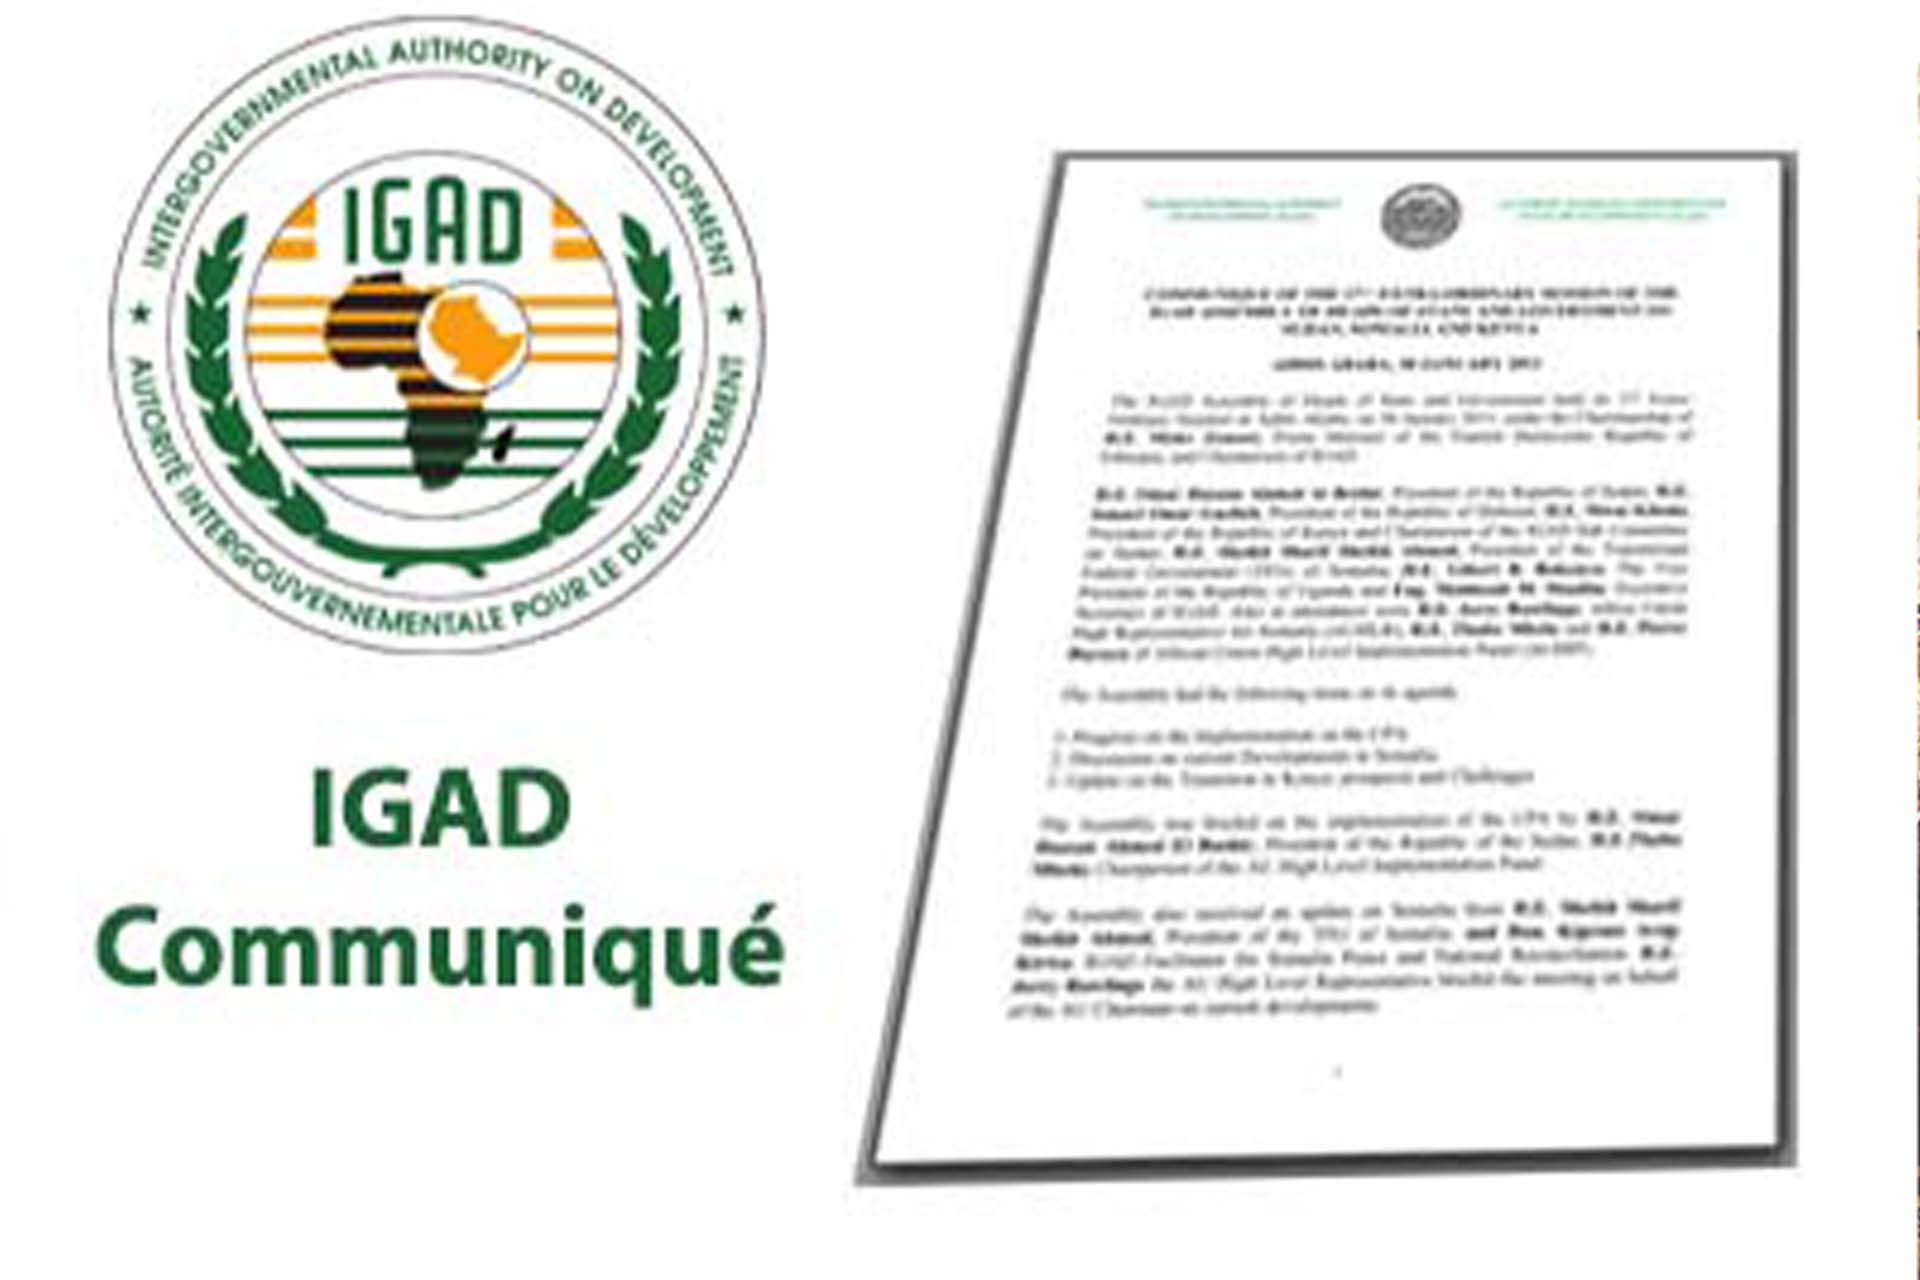 Communiqué: 33rd IGAD Council of Ministers on Somalia